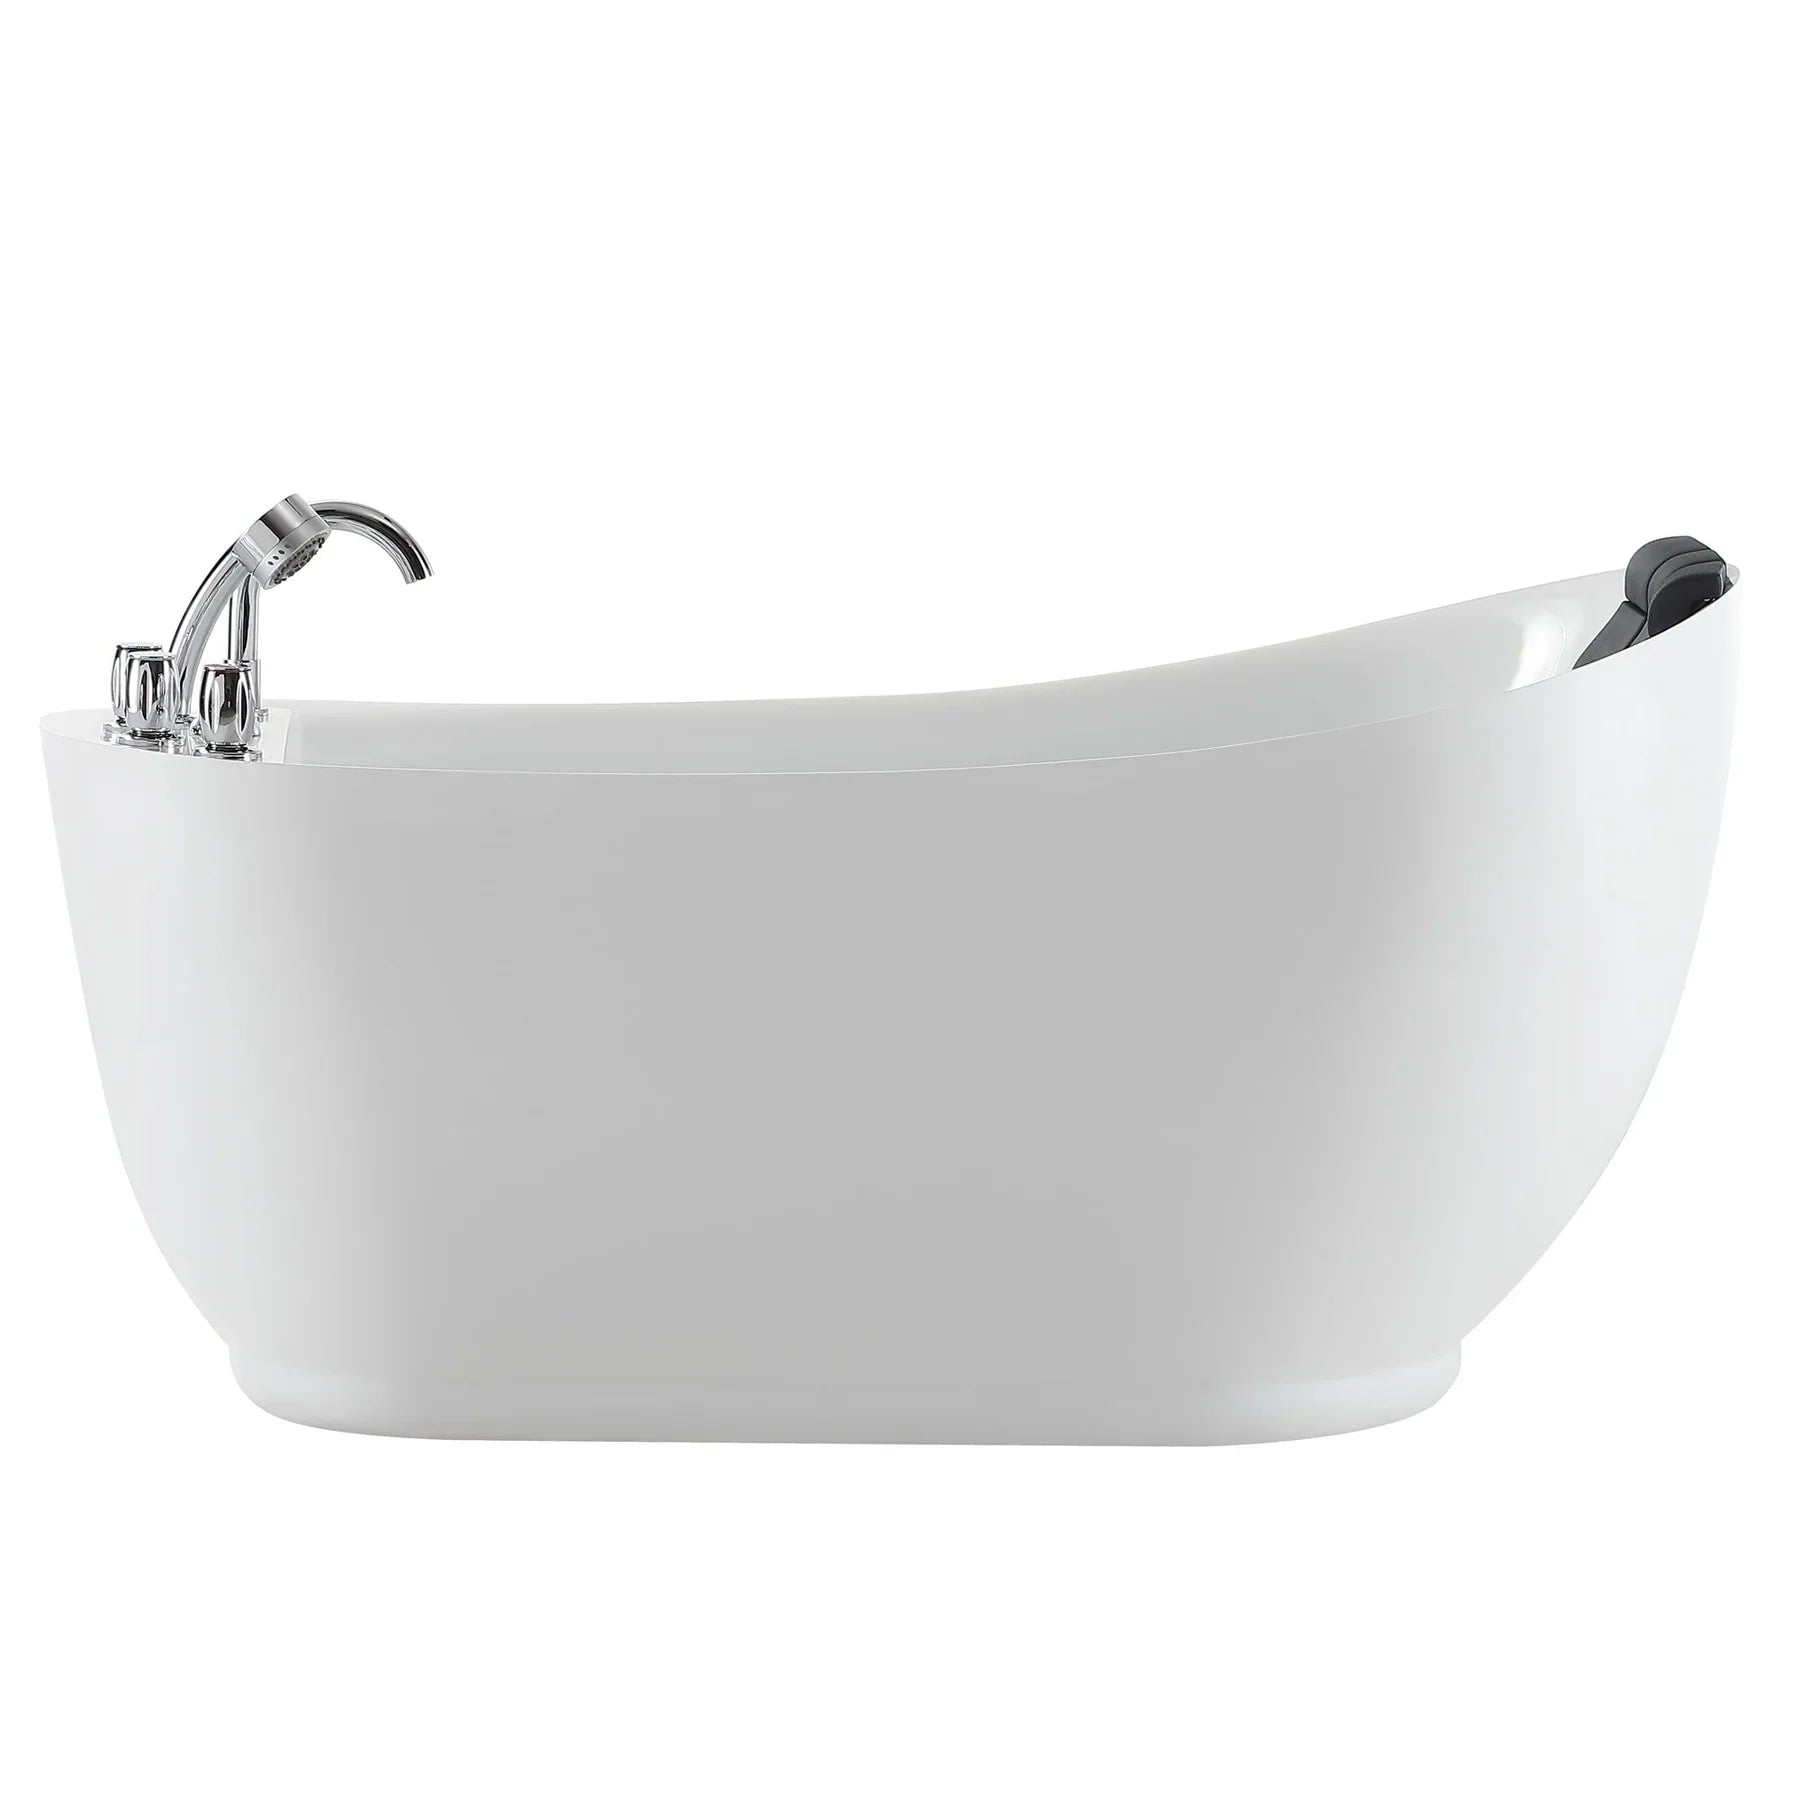 Empava 67 in. Freestanding Jetted Bathtub in White Acrylic (67AIS05)